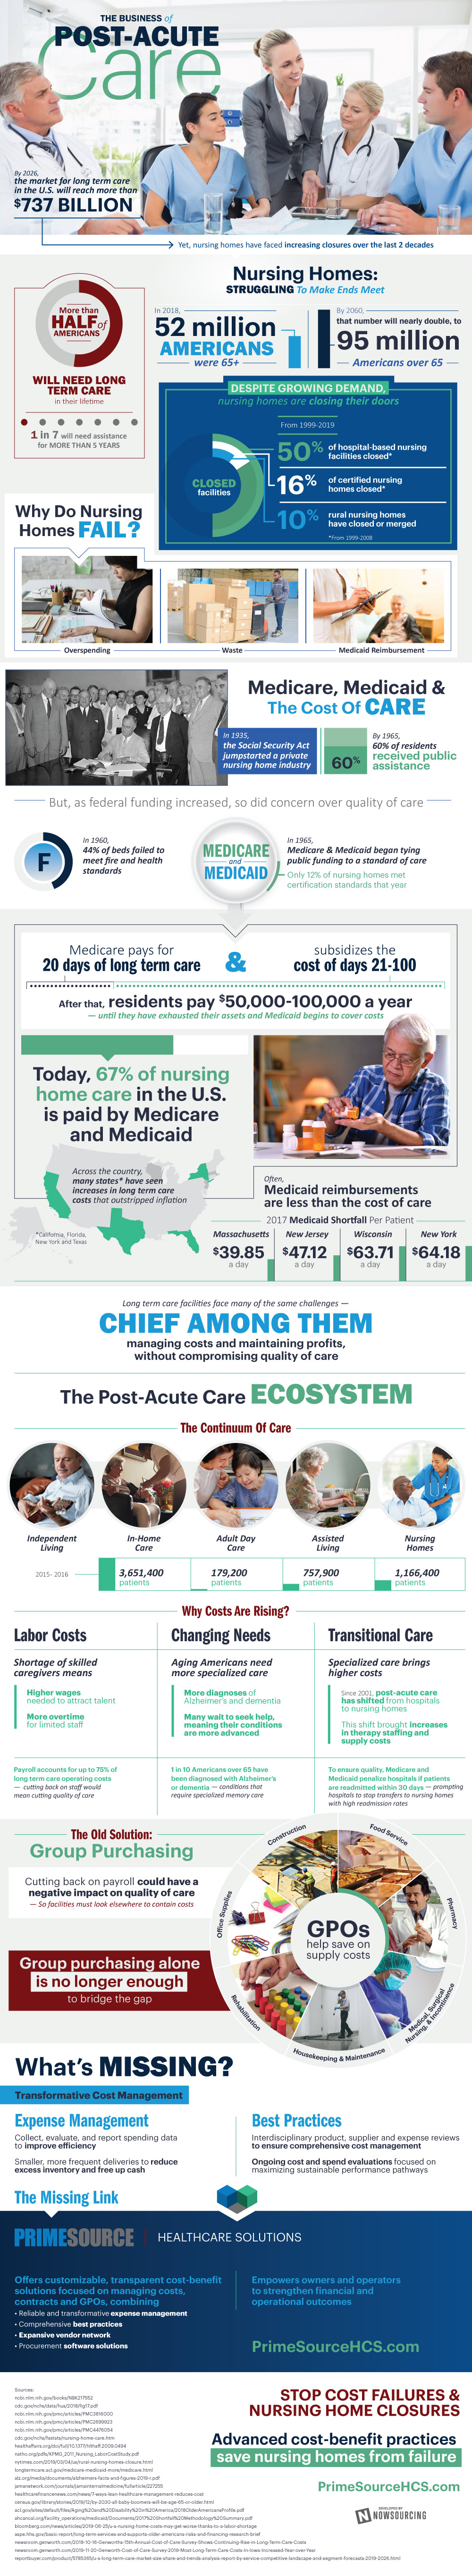 The Business of Post-Acute Care